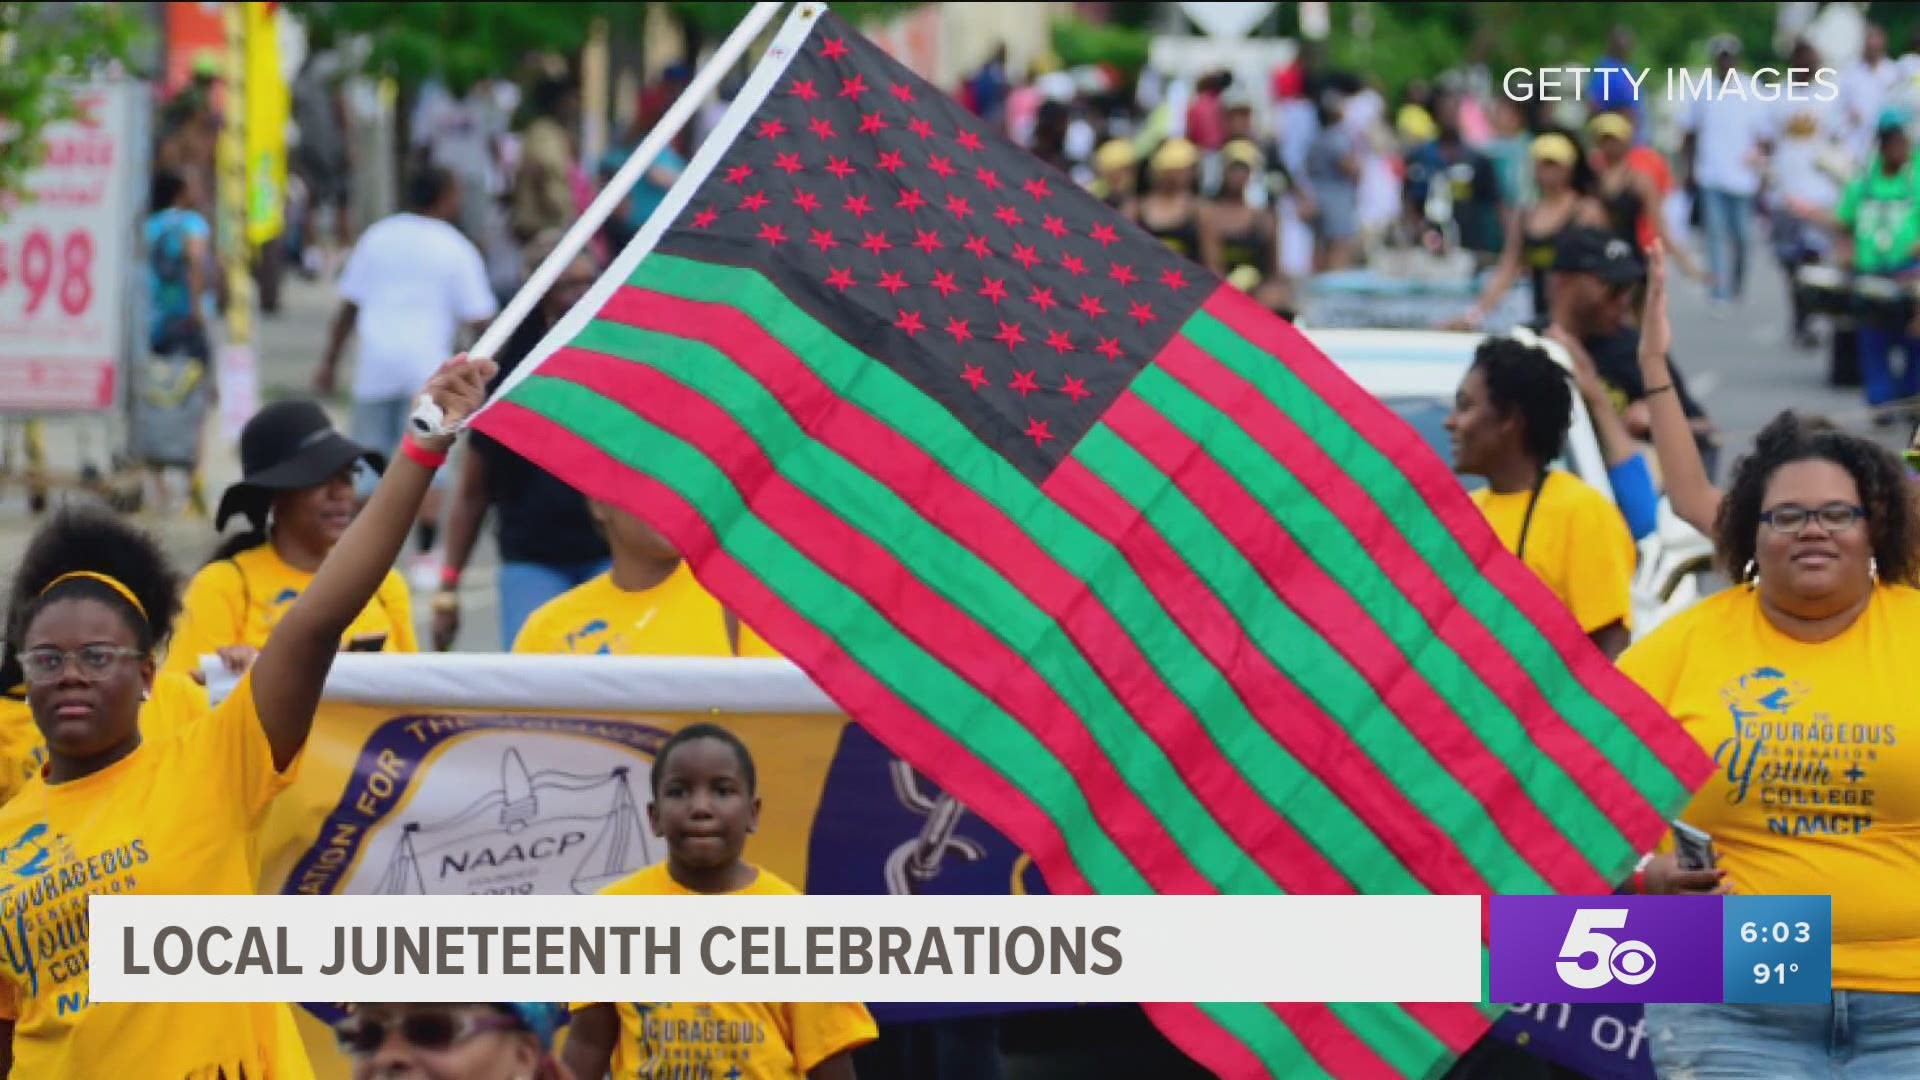 Juneteenth is this Saturday, and multiple events are scheduled in Northwest Arkansas and the River Valley to celebrate the holiday.